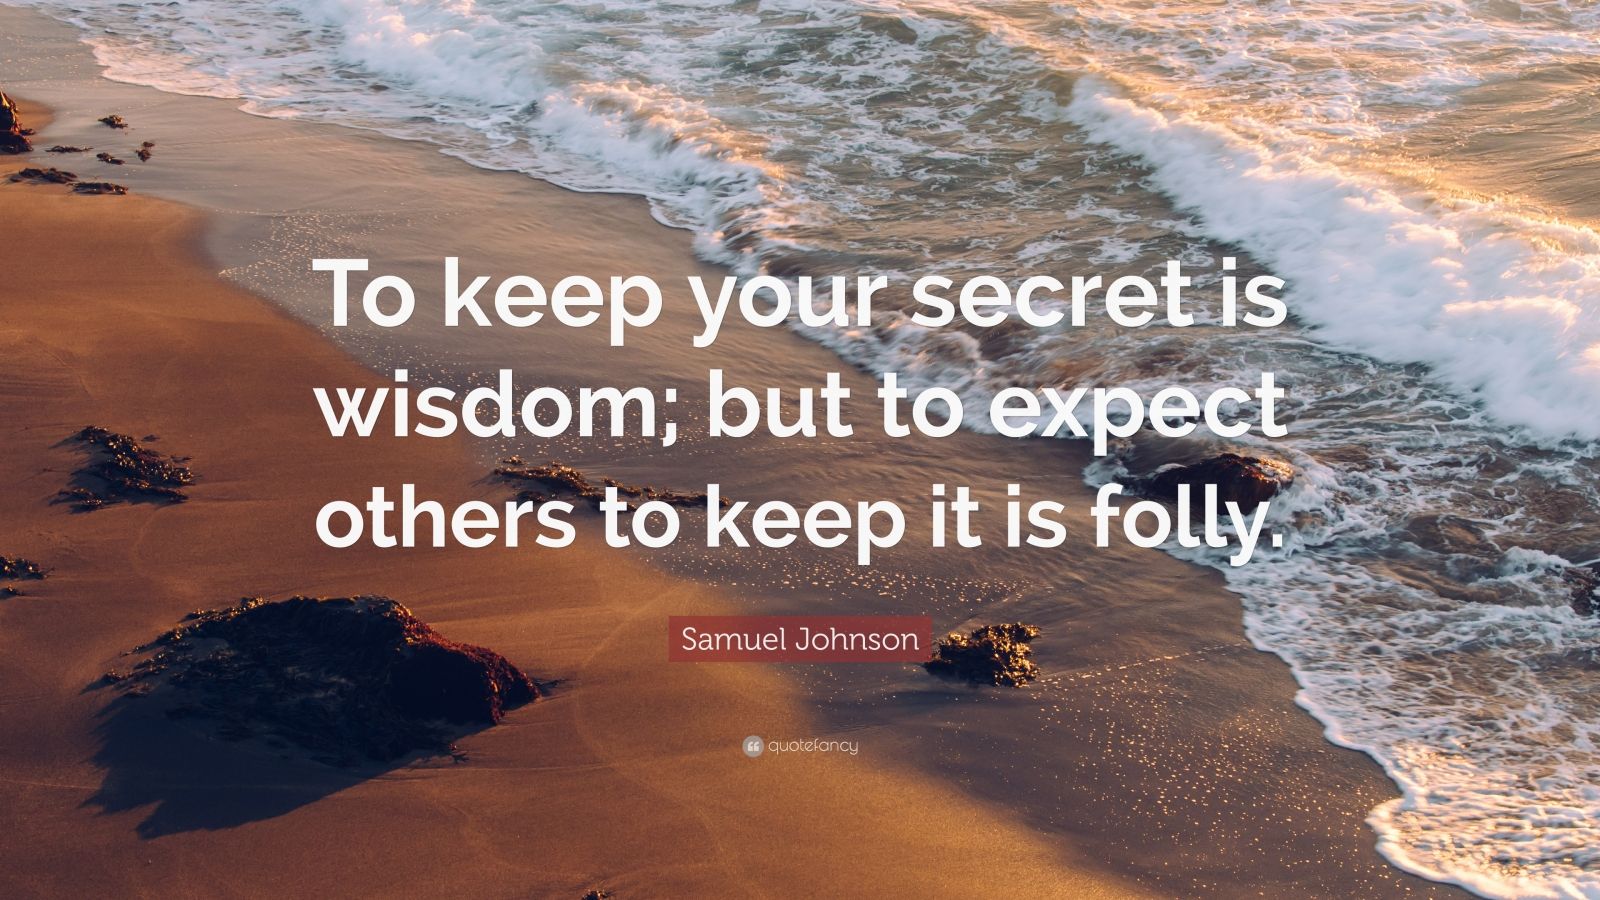 Samuel Johnson Quote “to Keep Your Secret Is Wisdom But To Expect Others To Keep It Is Folly 3717